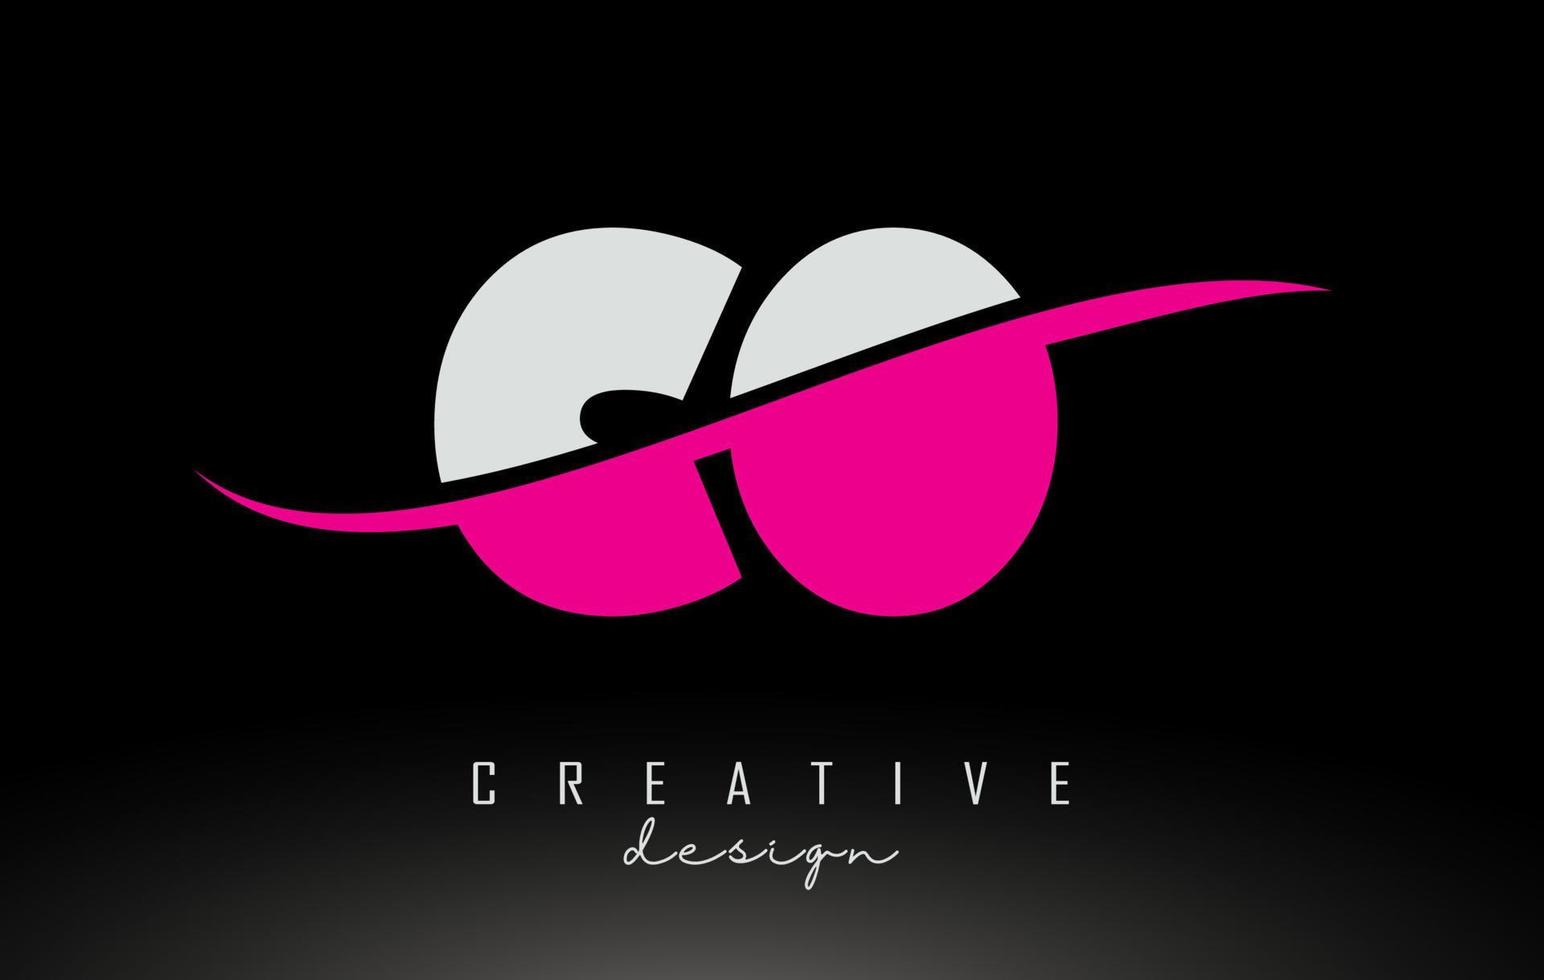 CO C O White and Pink Letter Logo with Swoosh. vector